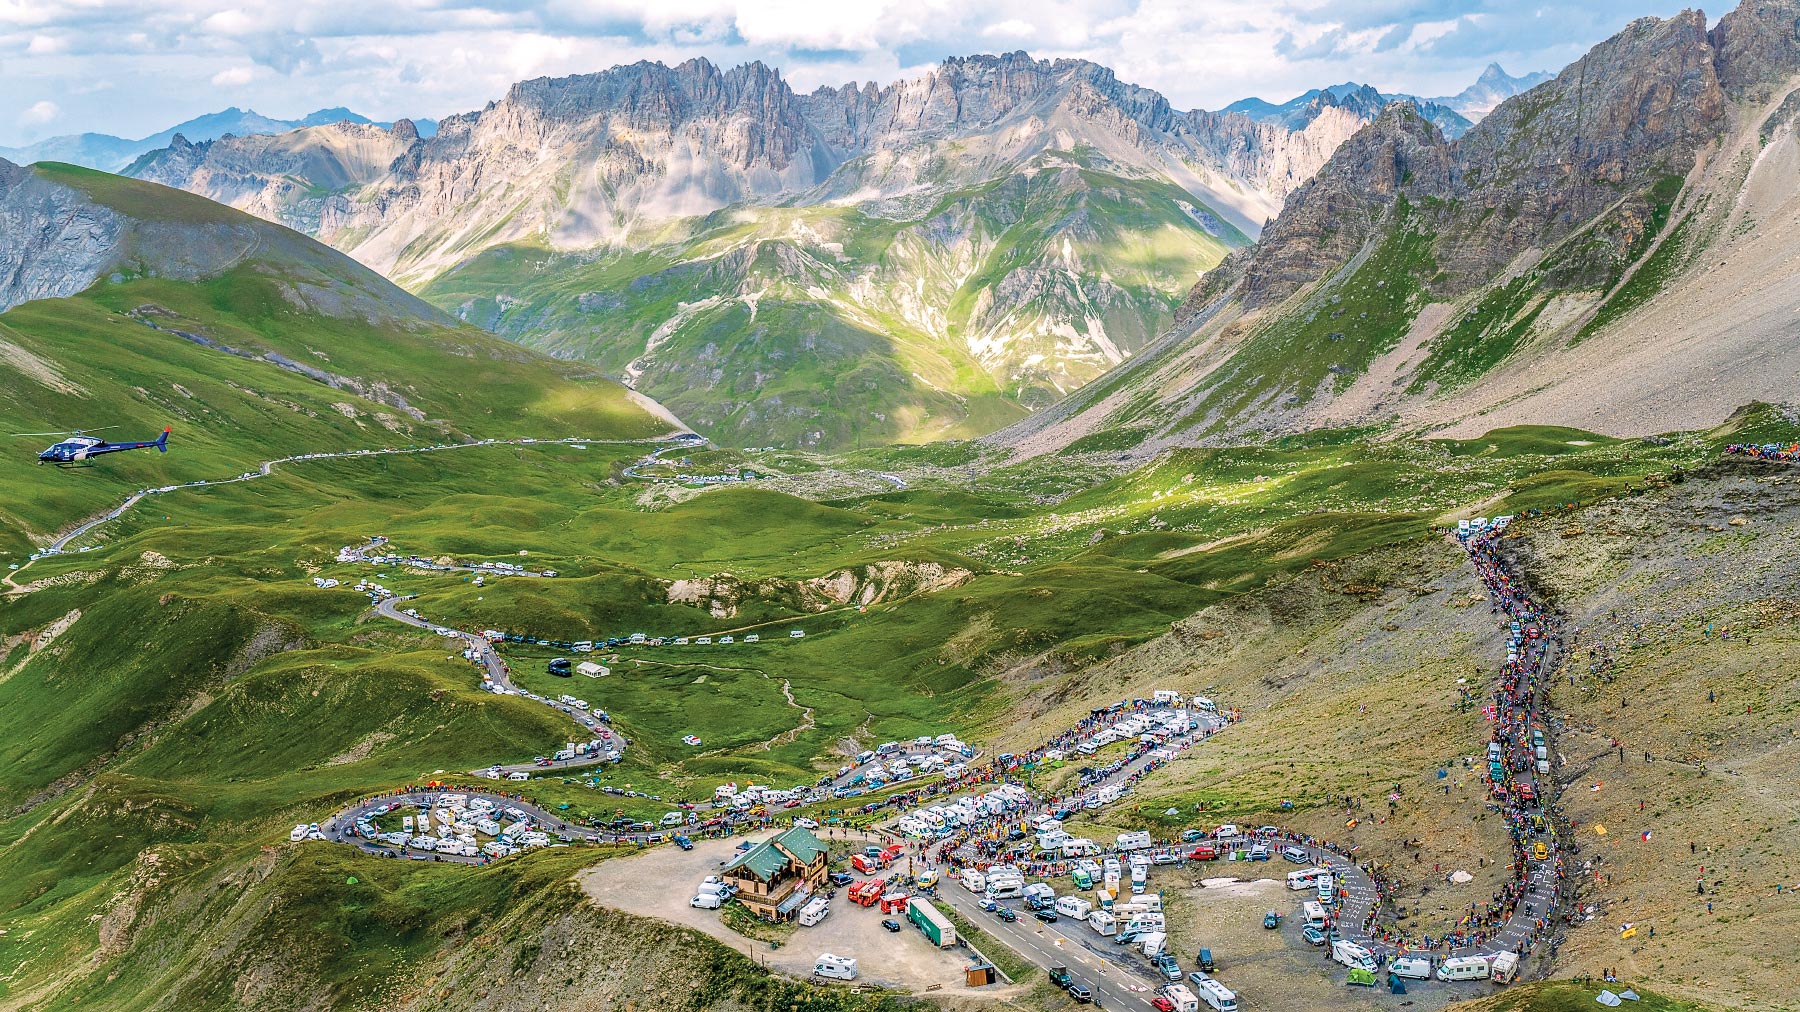 Tour de France visits the home of the gods of cycling high up on the top of the Col du Galibier. Gifts for cyclists